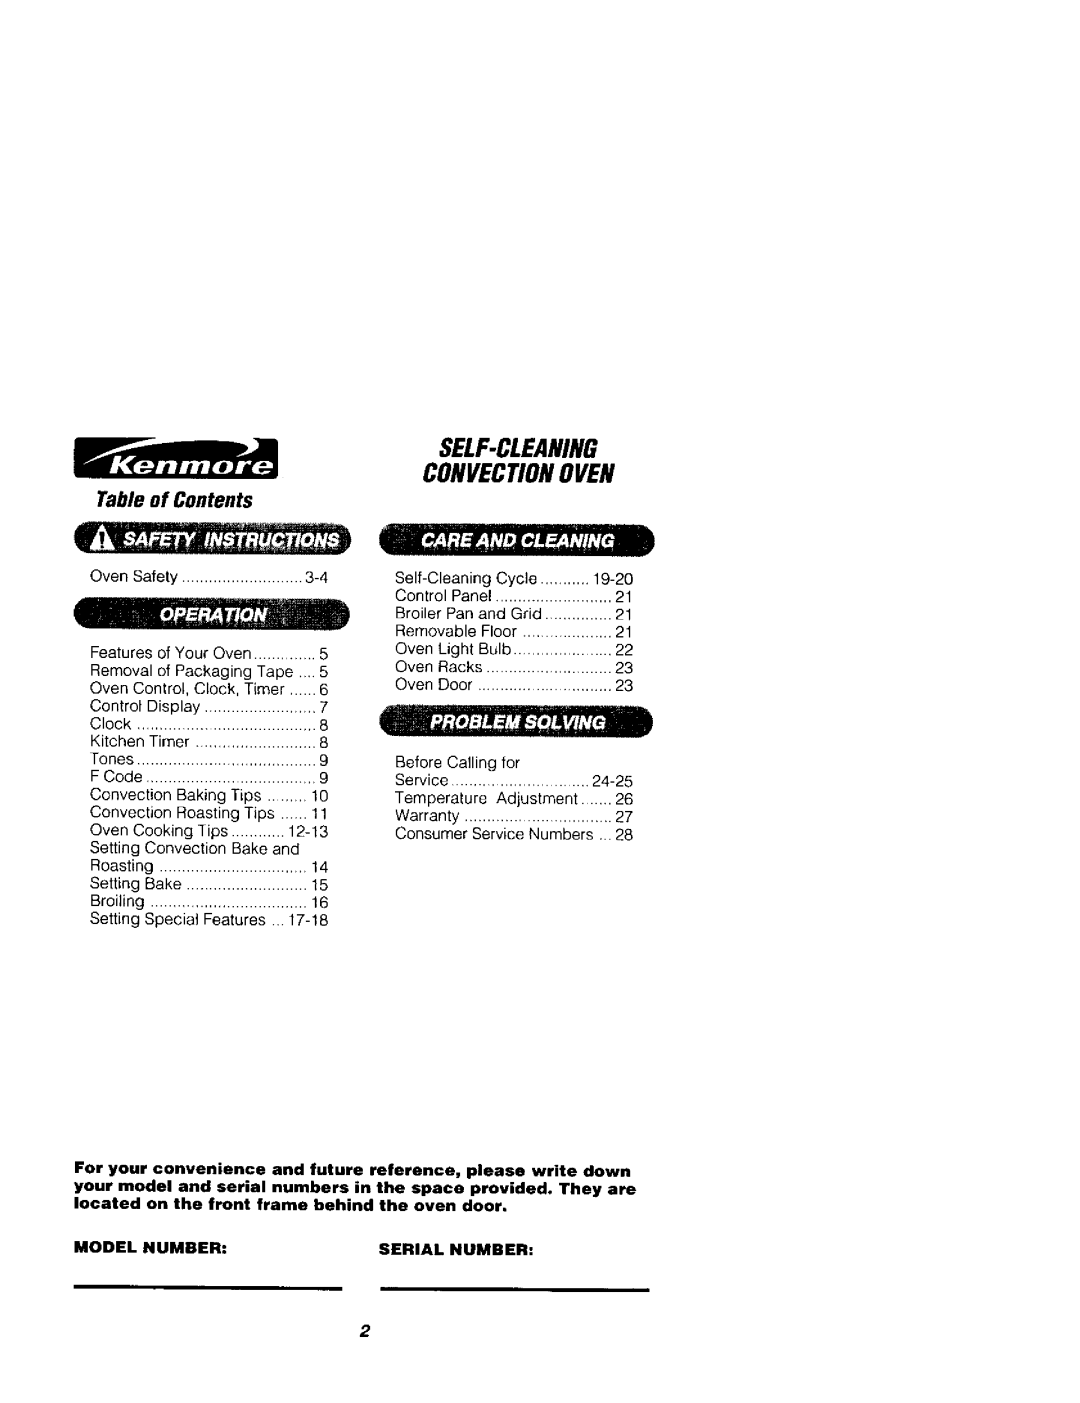 Kenmore 911.41789, 911.41785 owner manual Self-Cleaning Convectionoven, Table of Contents 